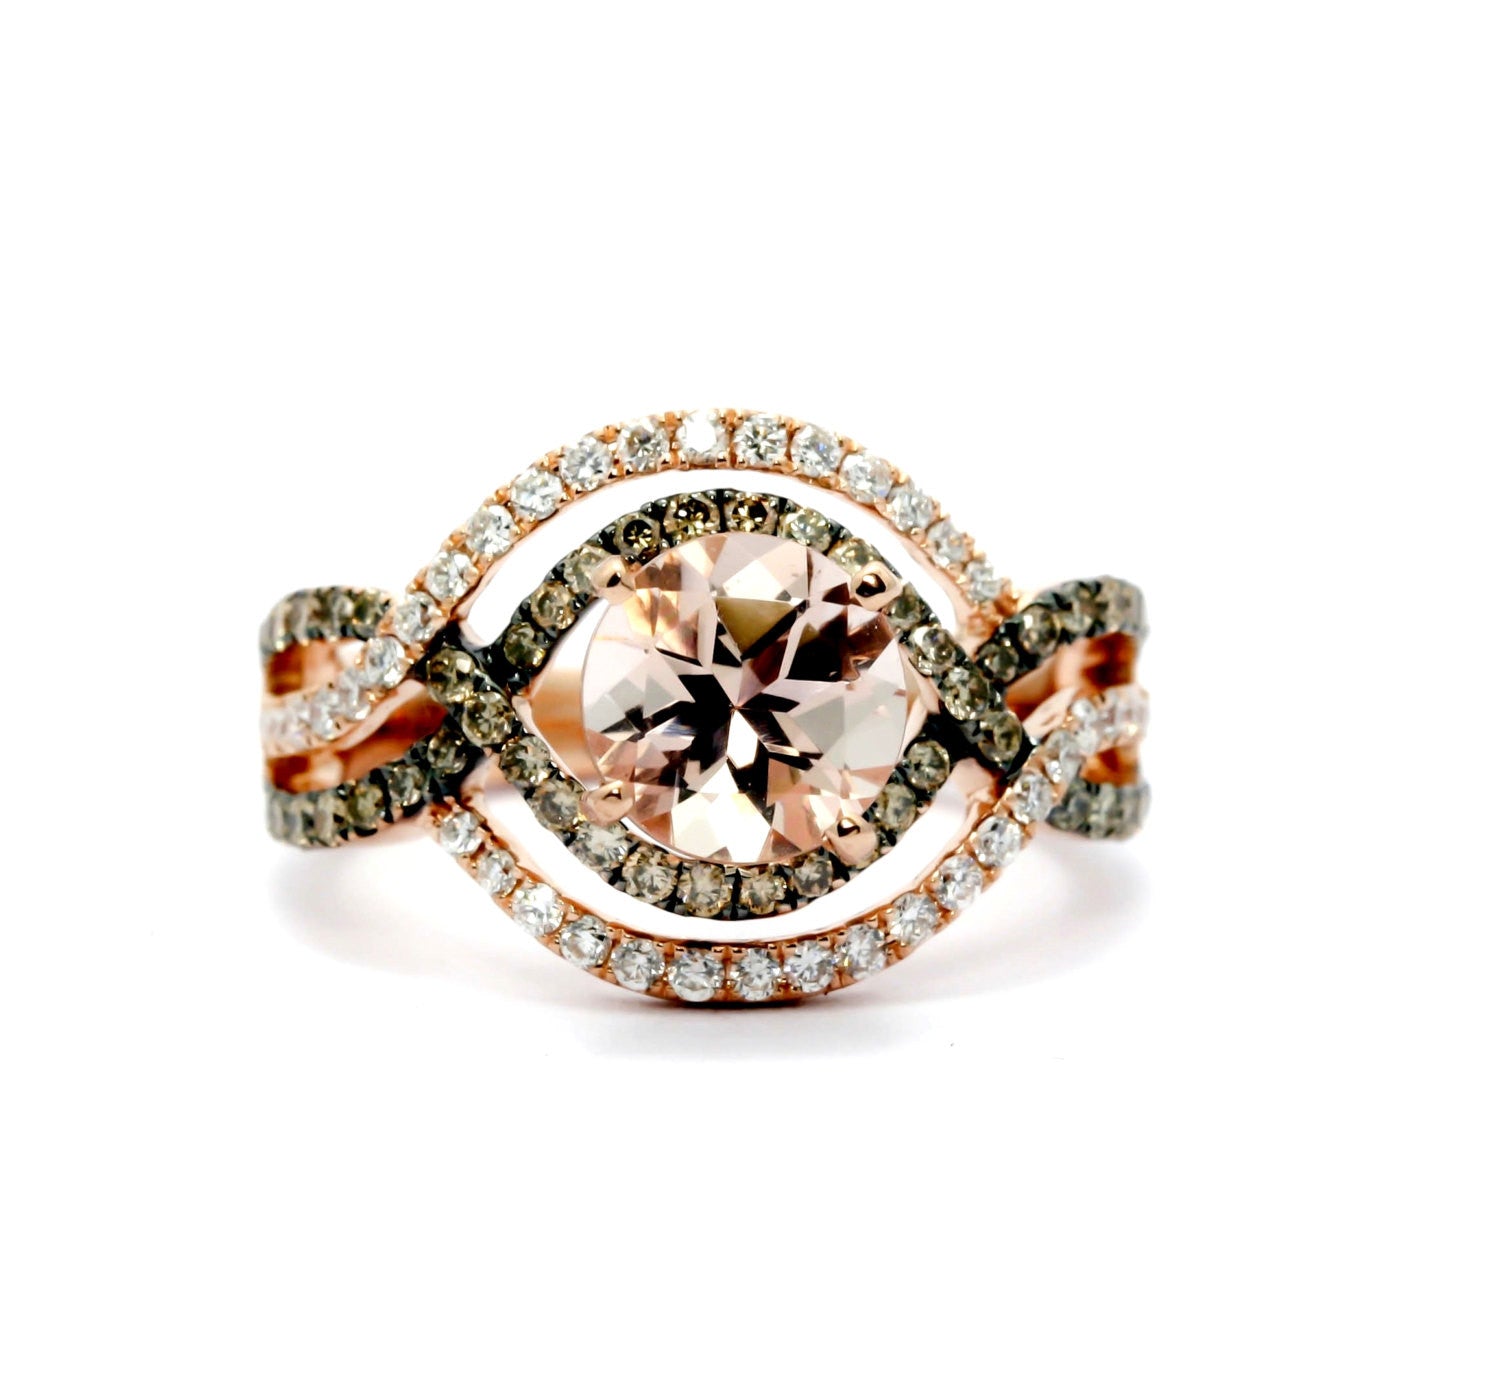 Unique Morganite Halo Infinity Rose Gold, White & Brown Diamonds Engagement Ring, Anniversary Ring With 1 Carat Morganite - MG94616